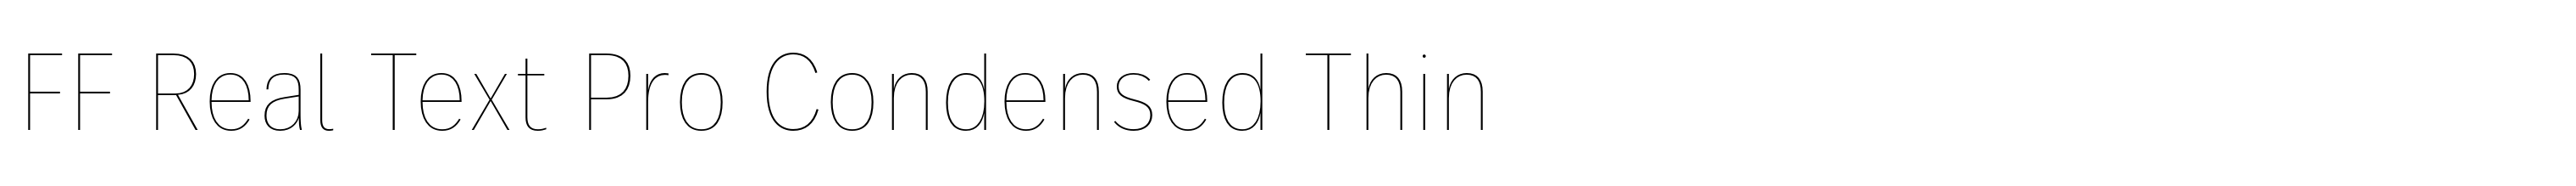 FF Real Text Pro Condensed Thin